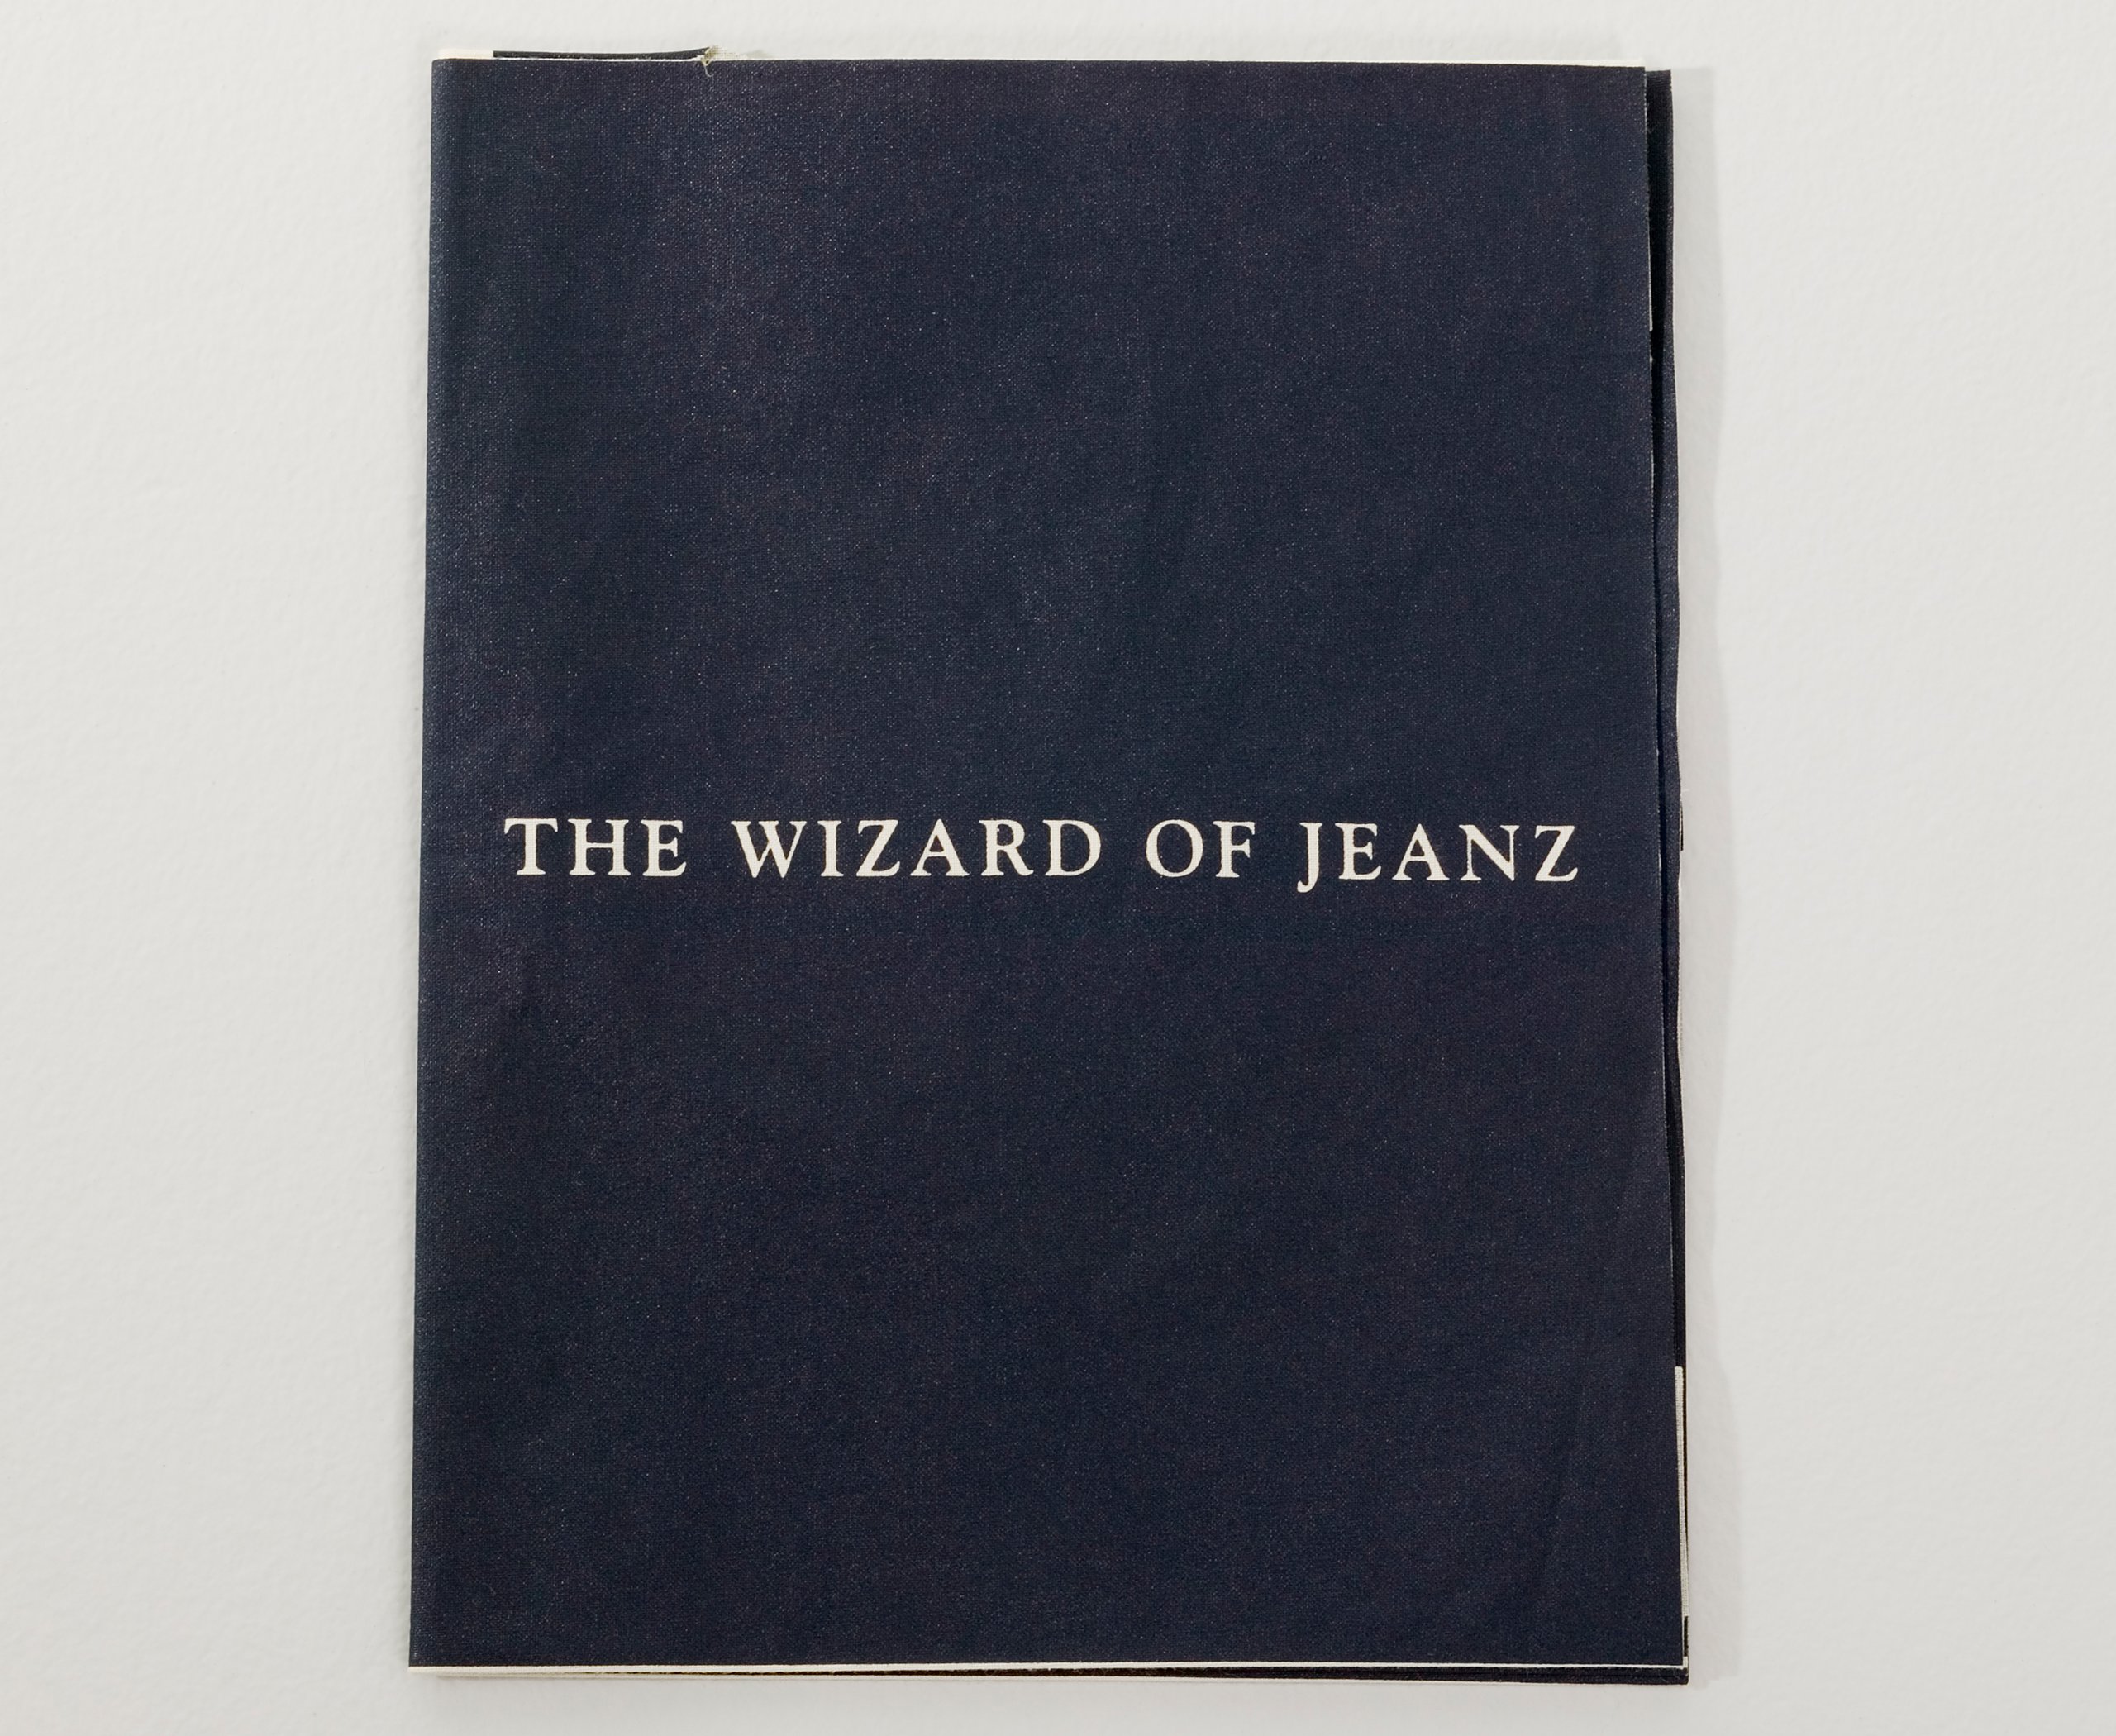 'The Wizard of Jeanz' collection by Hiroaki Ohya